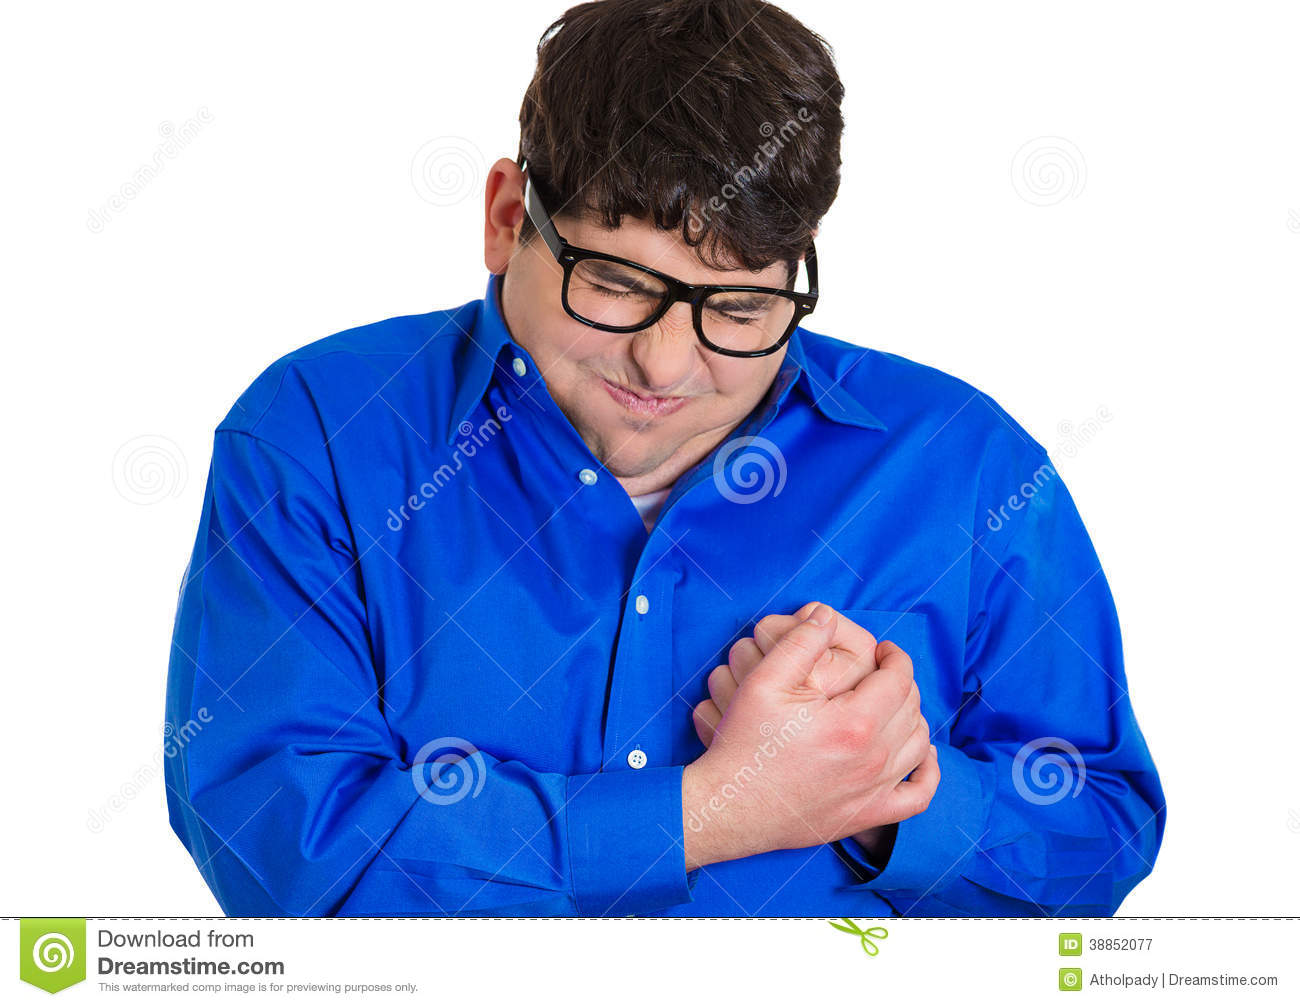 Chest Pain Isolated On White Background  Negative Emotion Facial